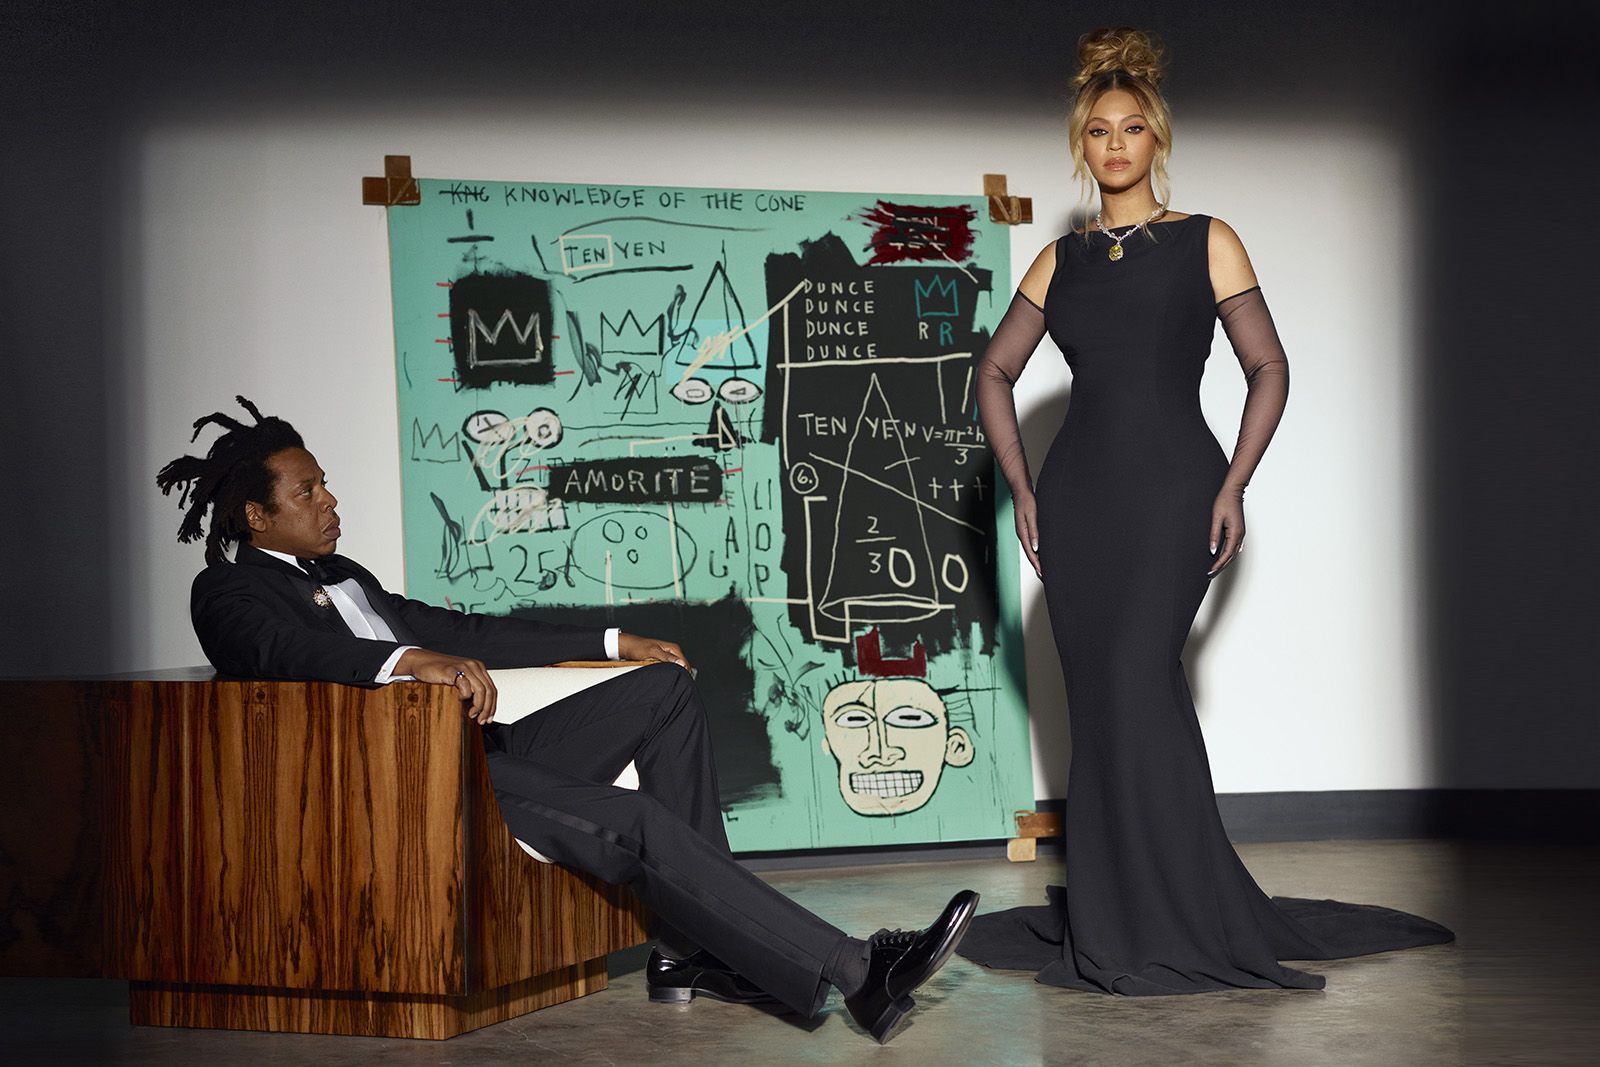 Beyoncé and Jay Z photographed for the Tiffany & Co. About Love campaign, including the Tiffany Diamond necklace